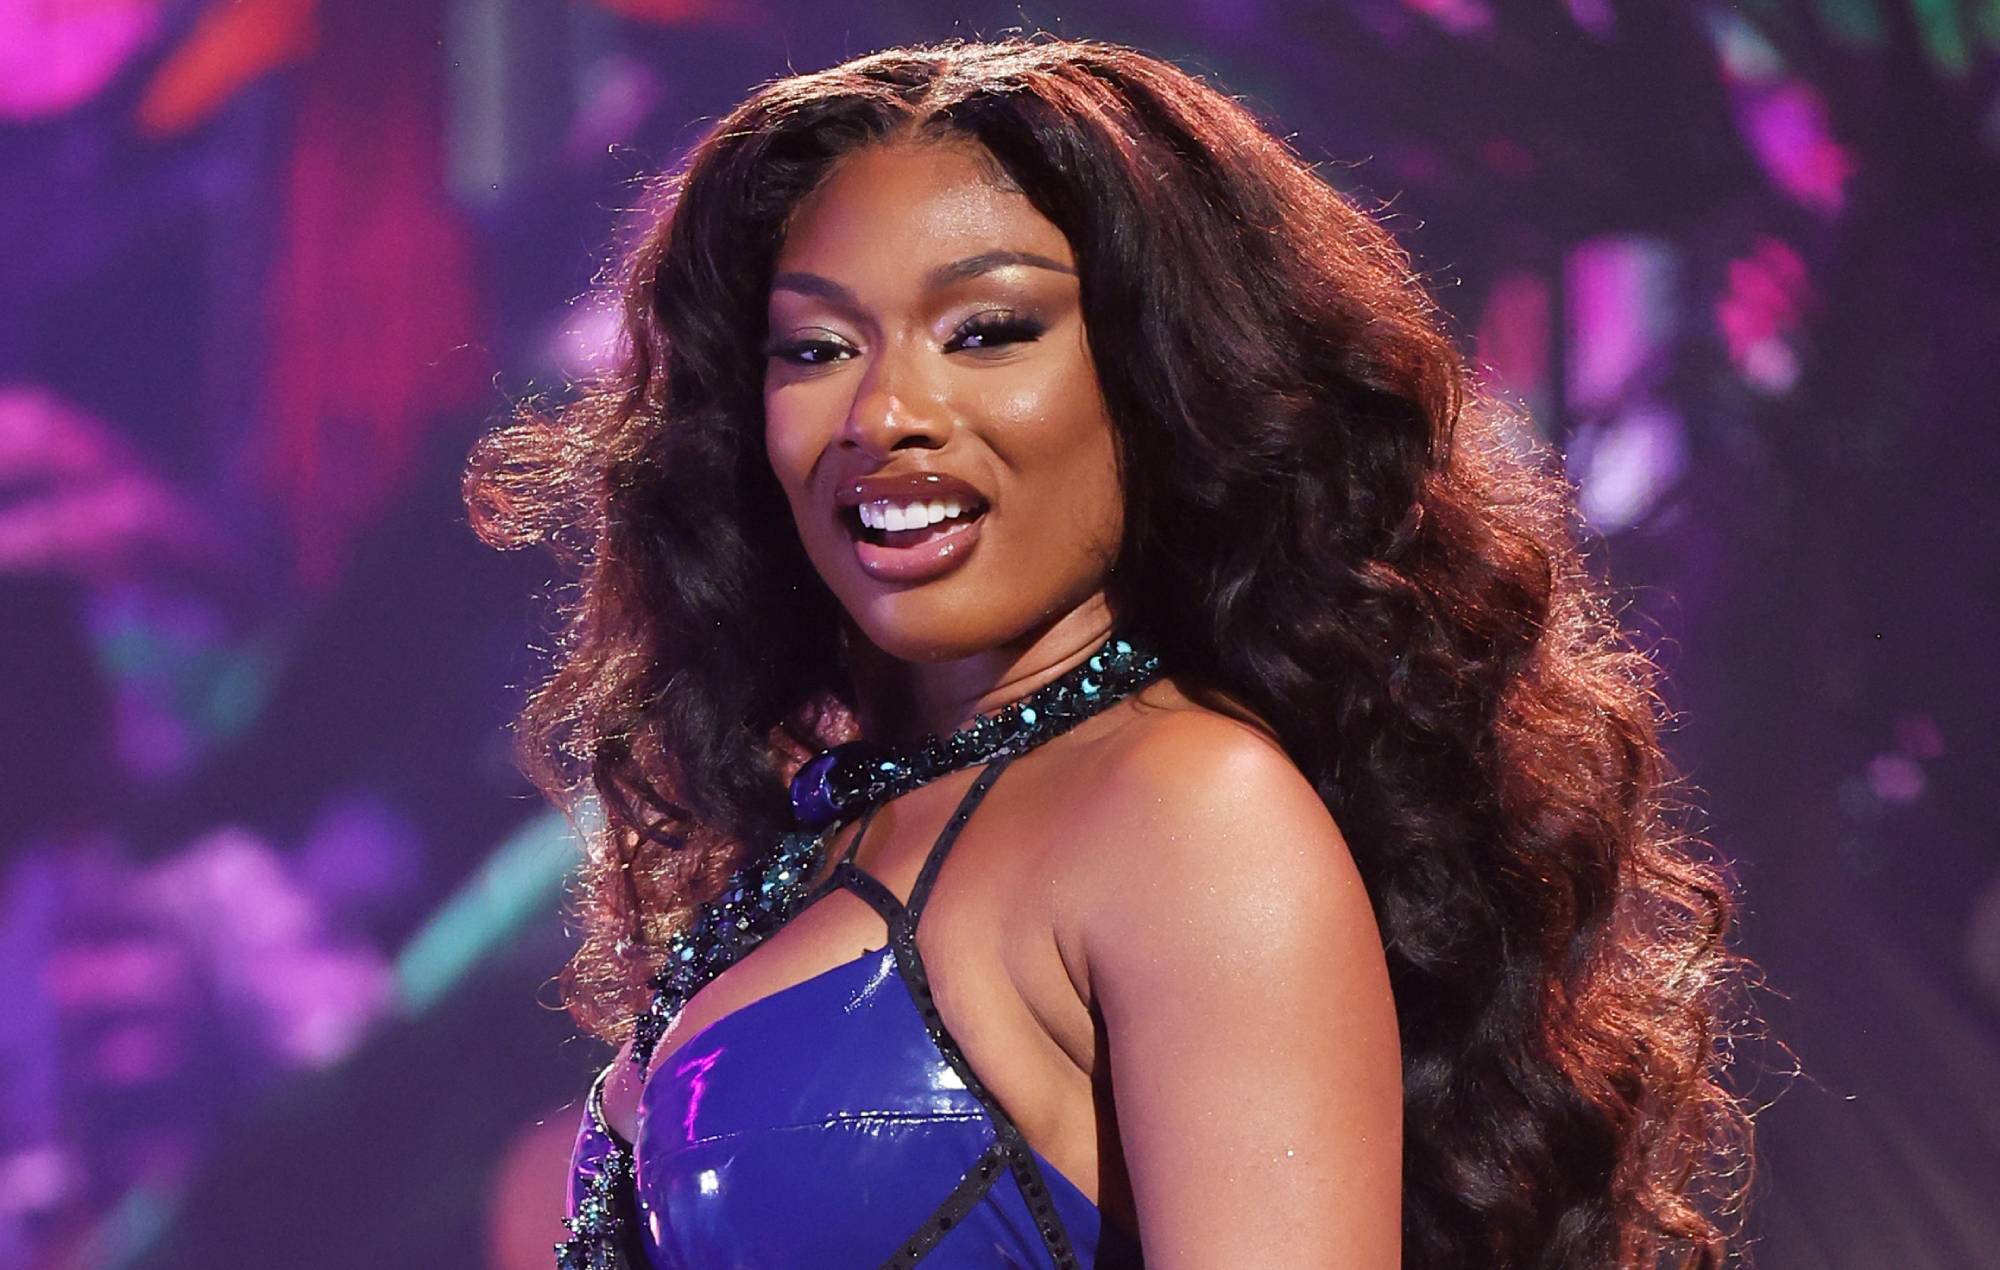 Megan Thee Stallion says she has no label and her next album will be self-funded